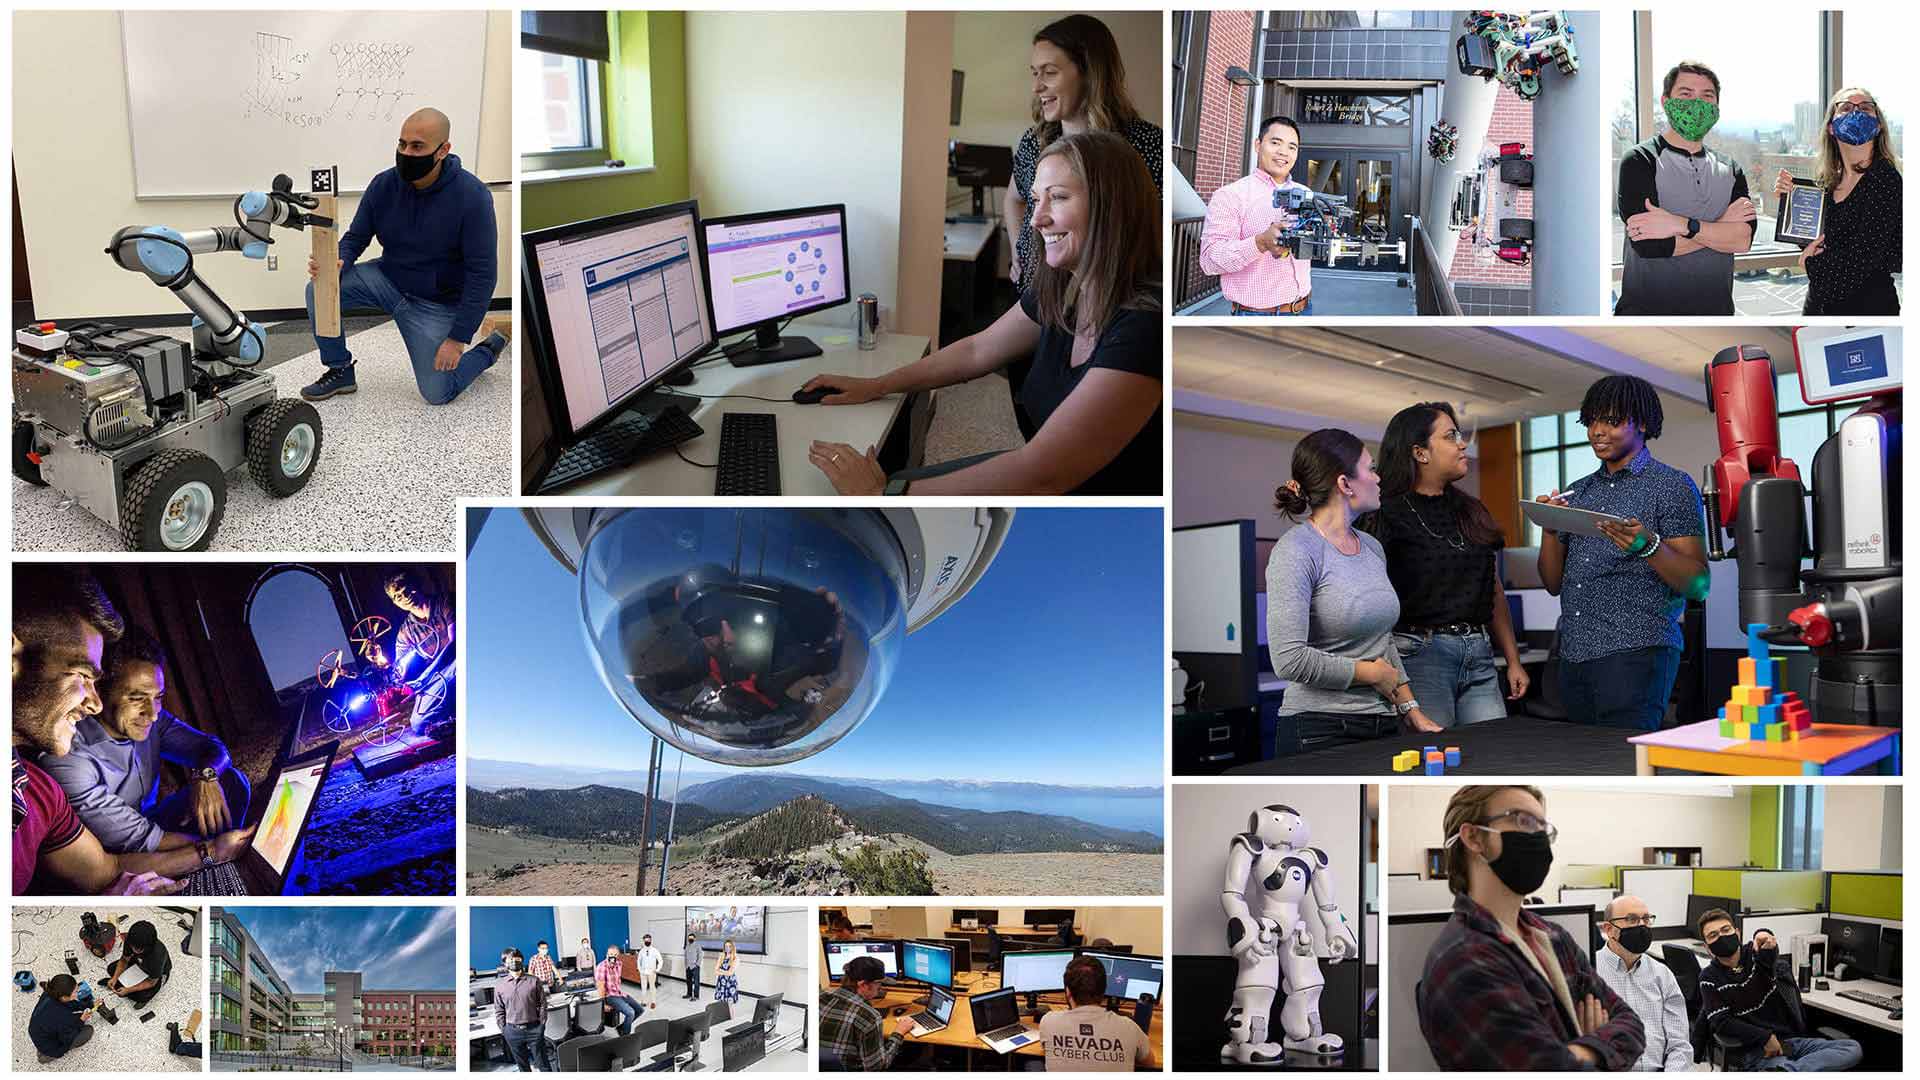 Collage of students in various computer science and engineering environments